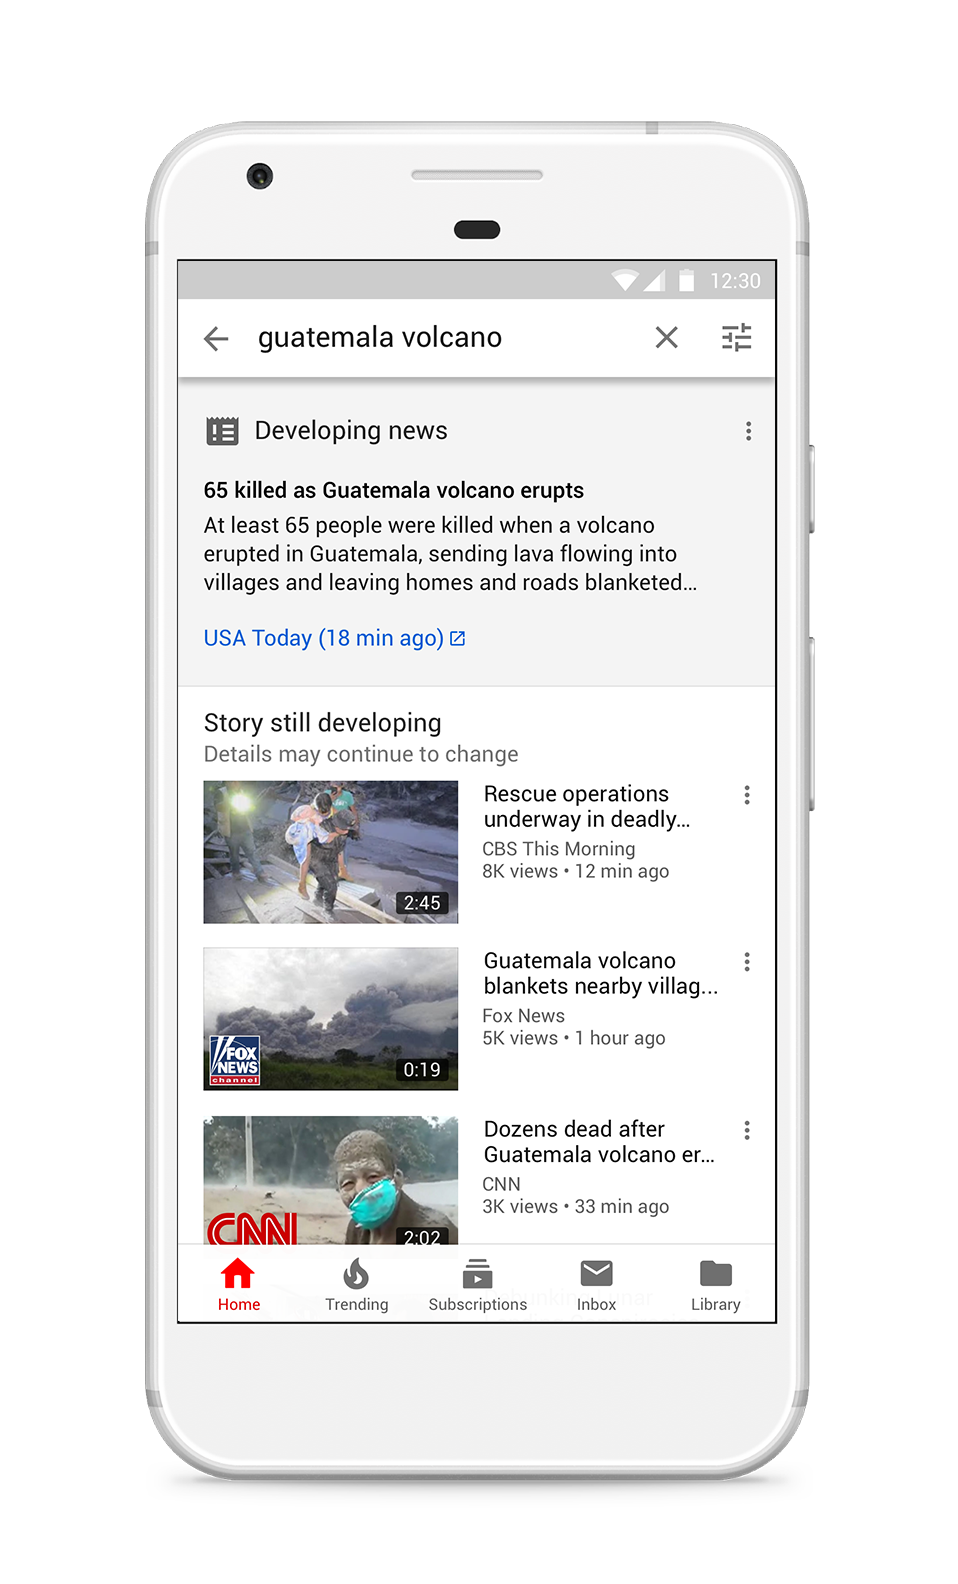 YouTube Launches New Features for a Better News Experience 1 | Digital Marketing Community